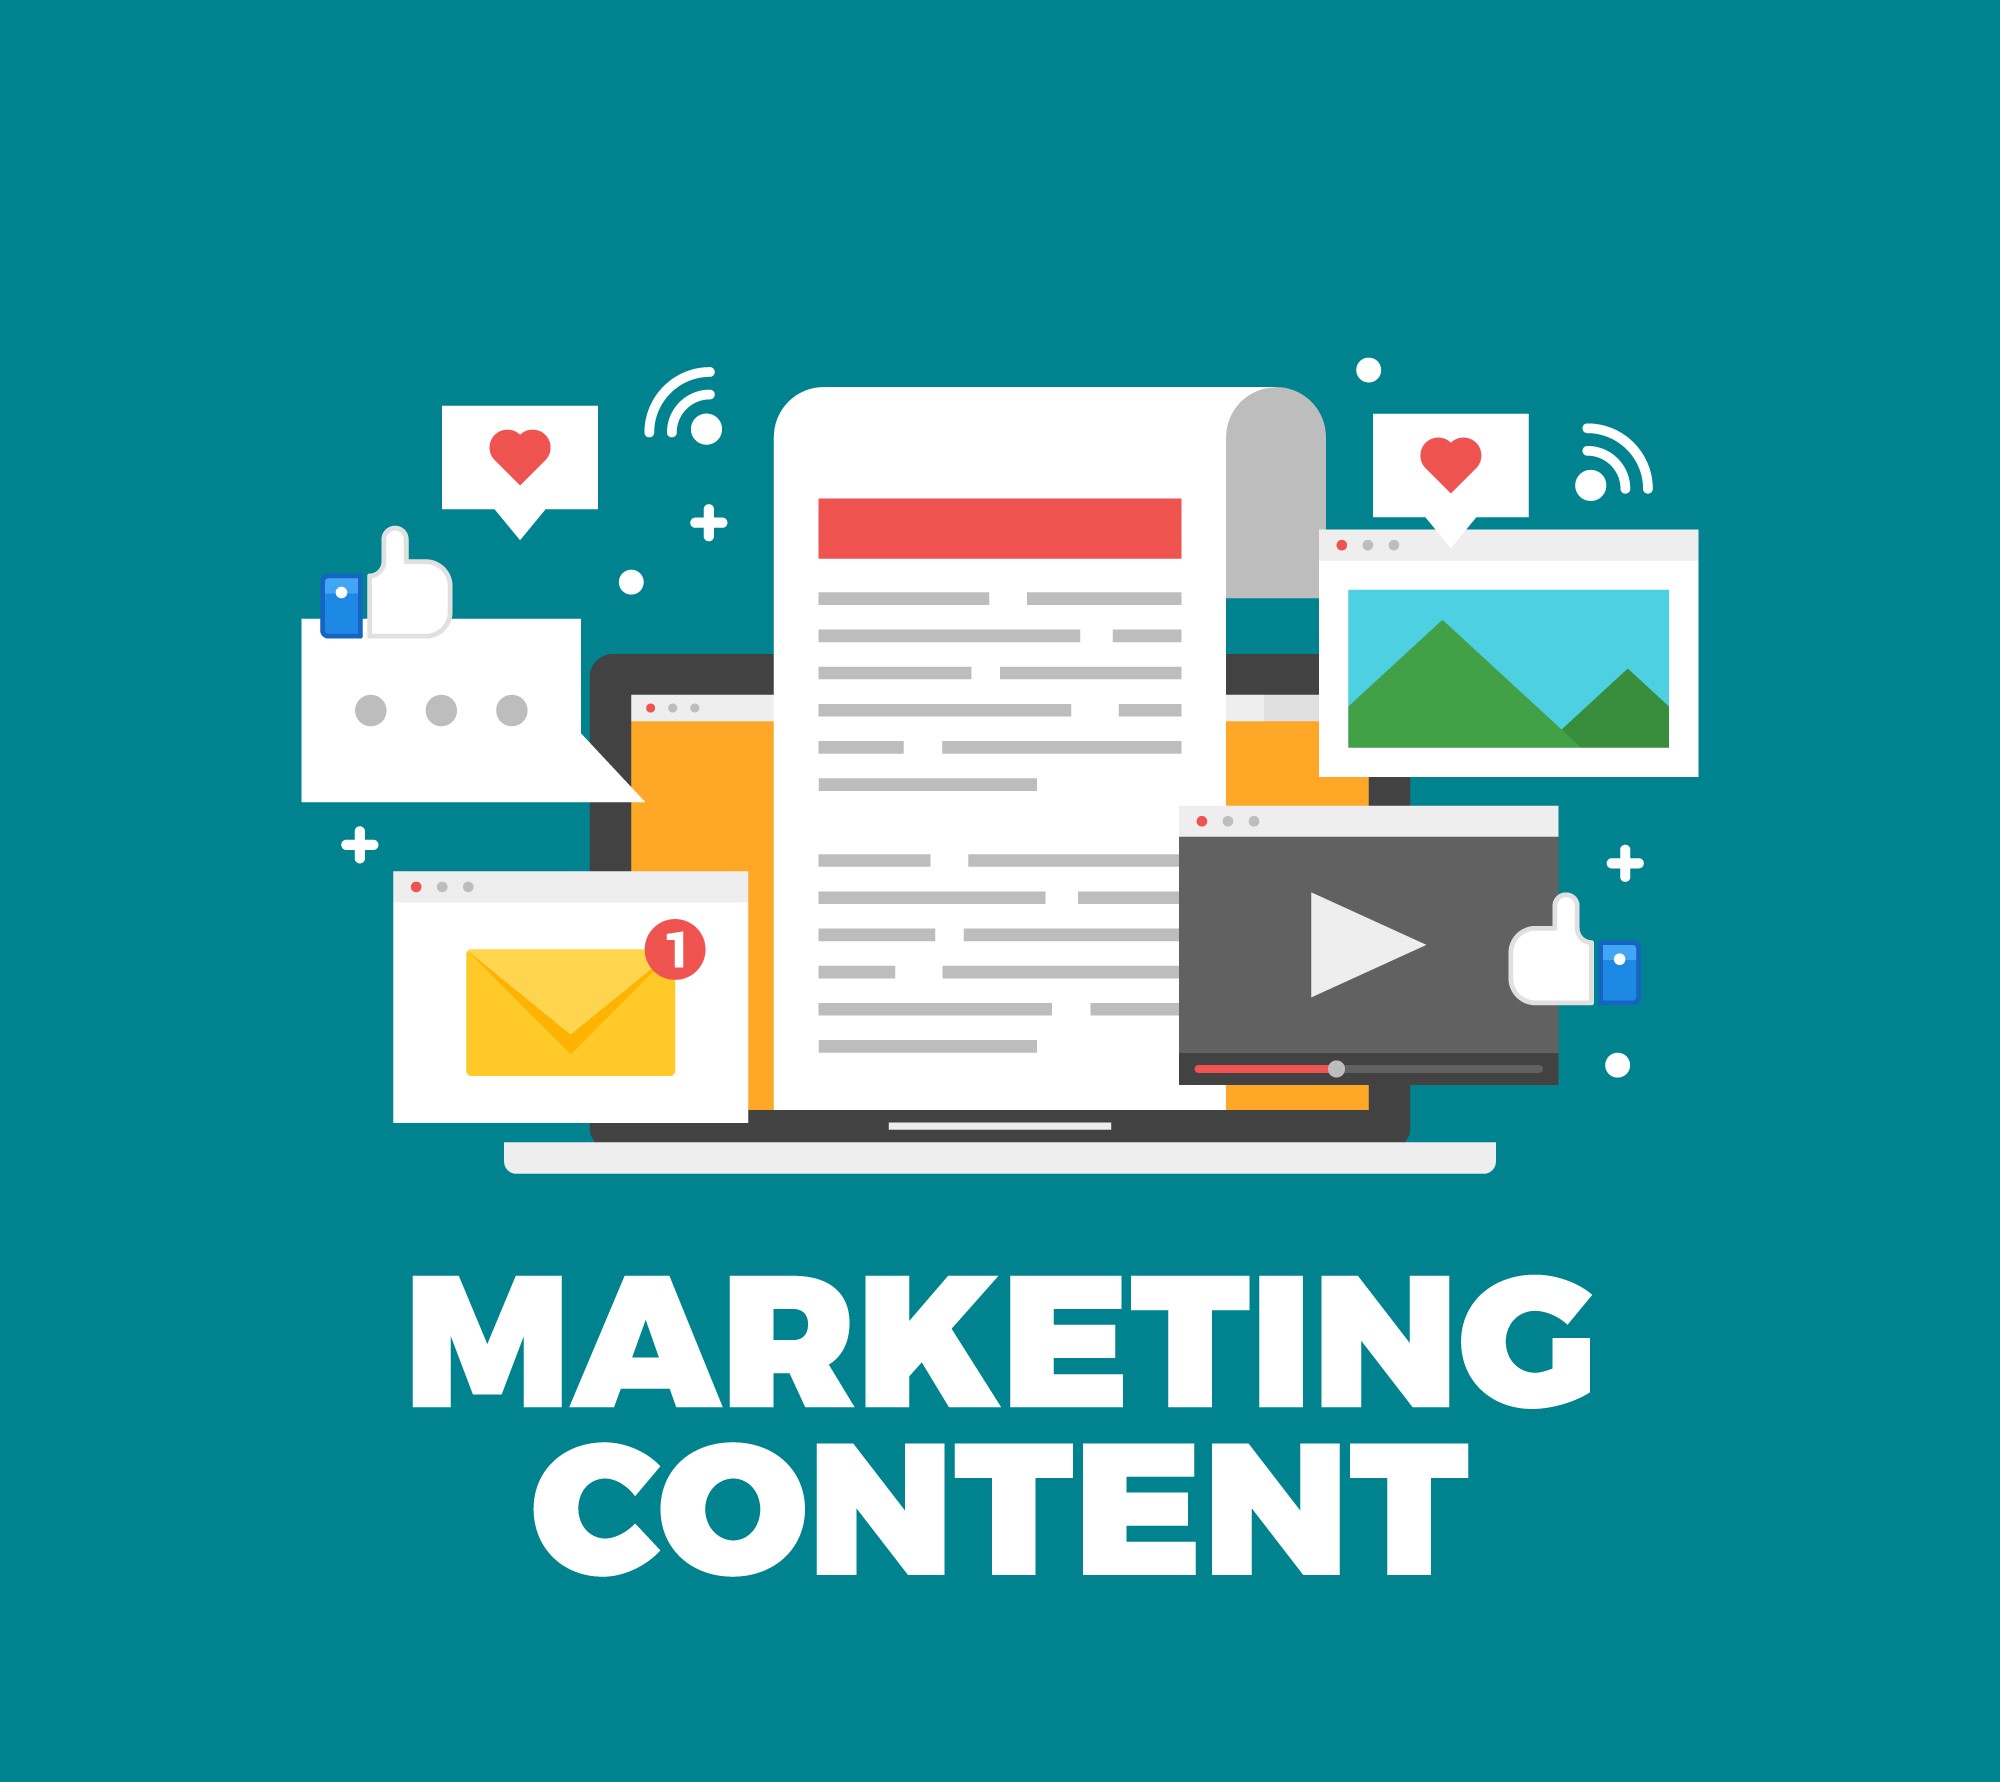 Why is content marketing important?